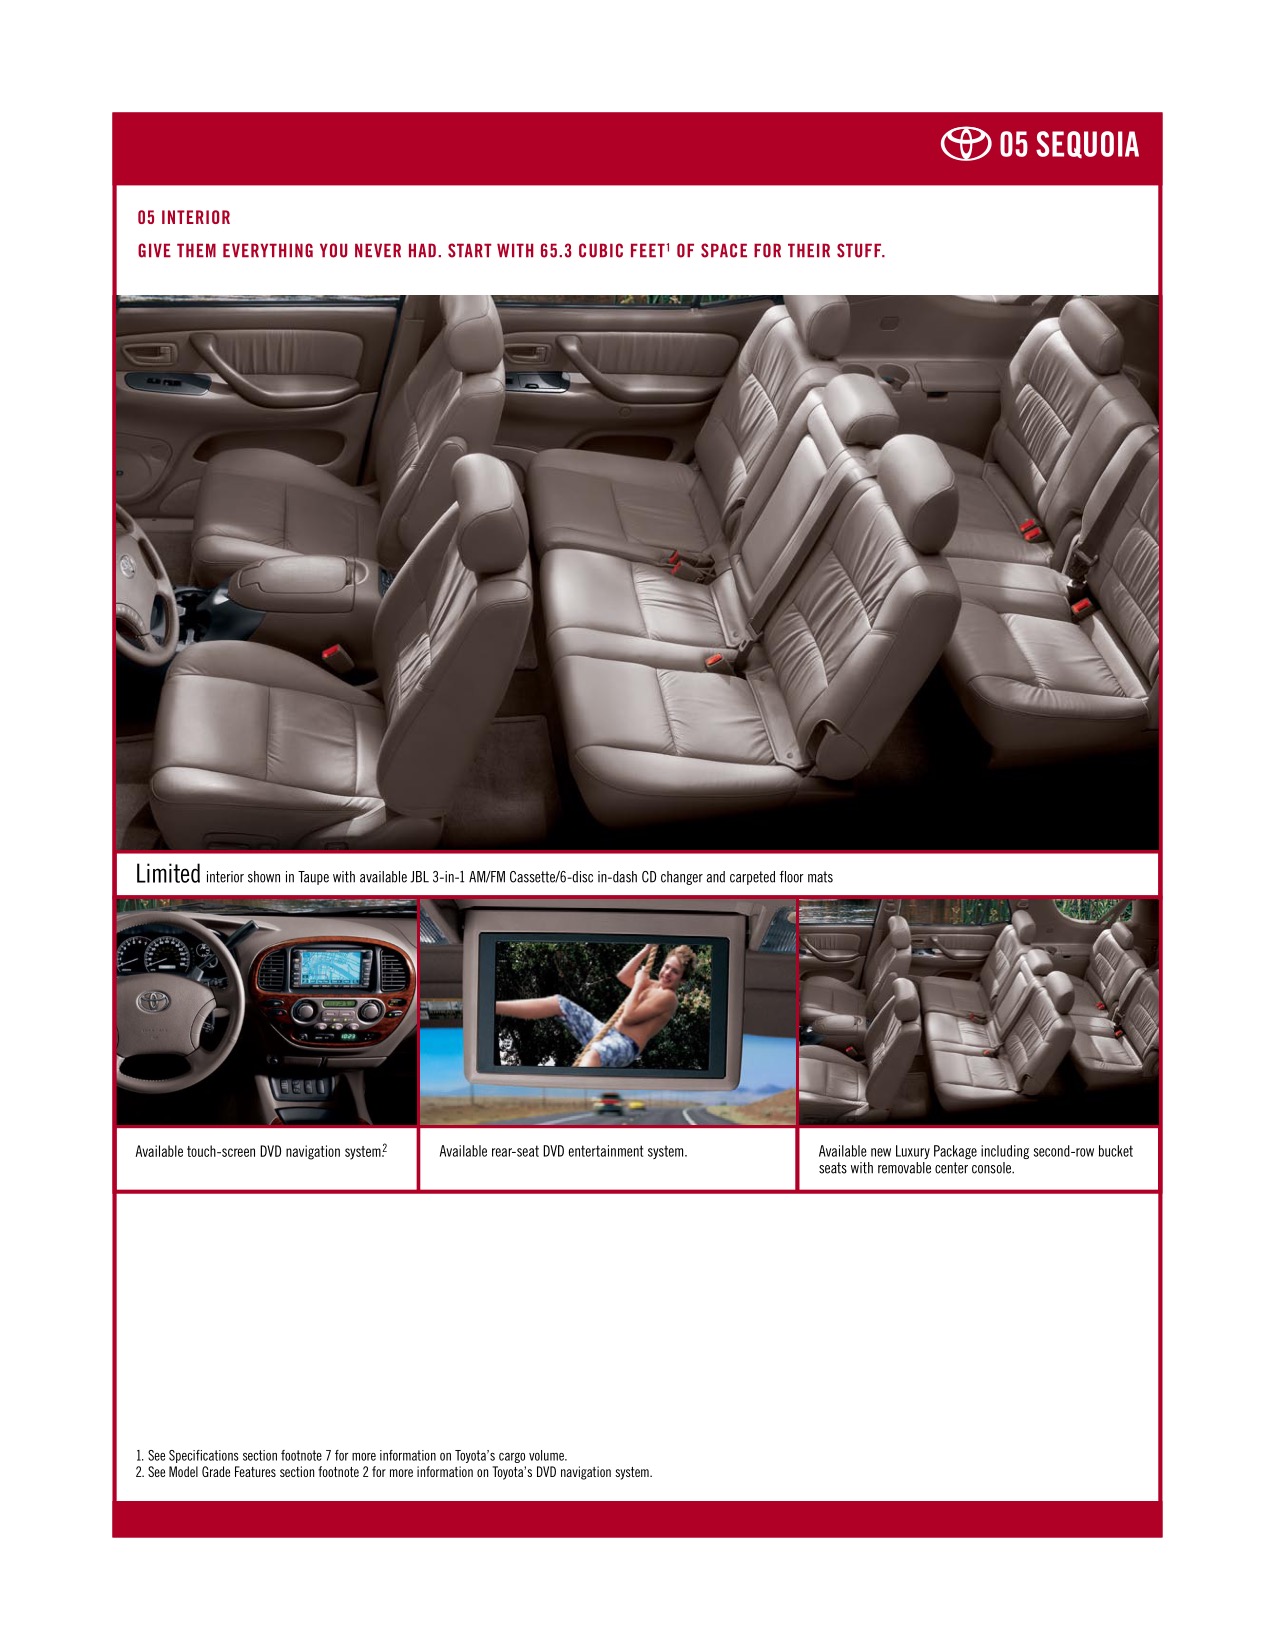 2005 Toyota Sequoia Brochure Page 6